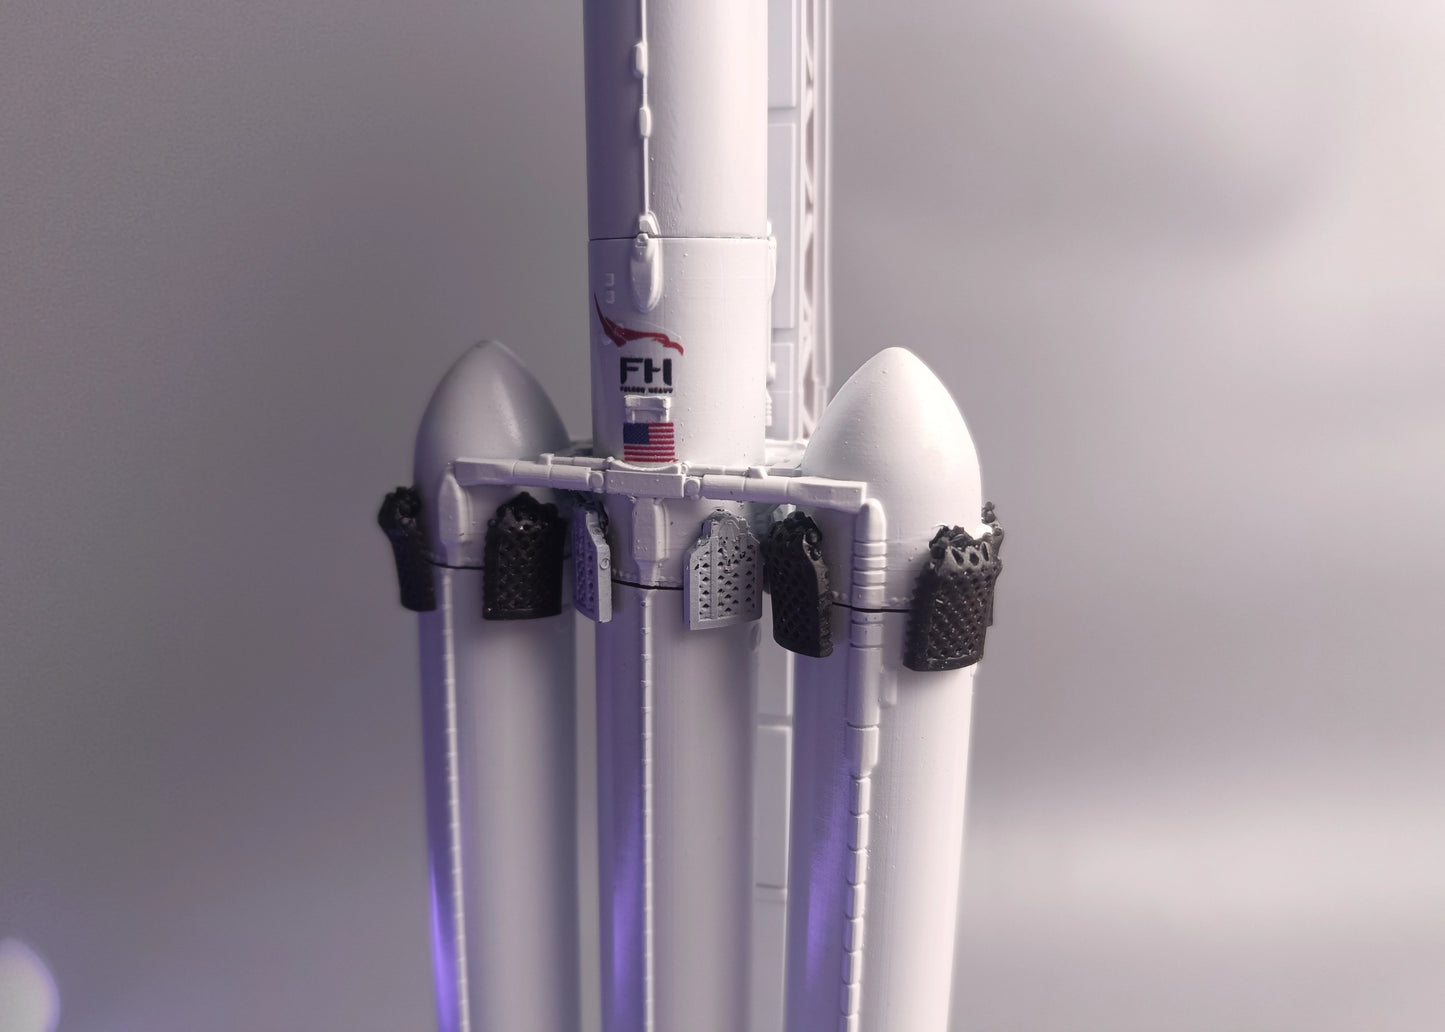 Grid rudders and the FH logo on the first stage of the Falcon Heavy rocket. SpaceX rocket model in 1:200 scale